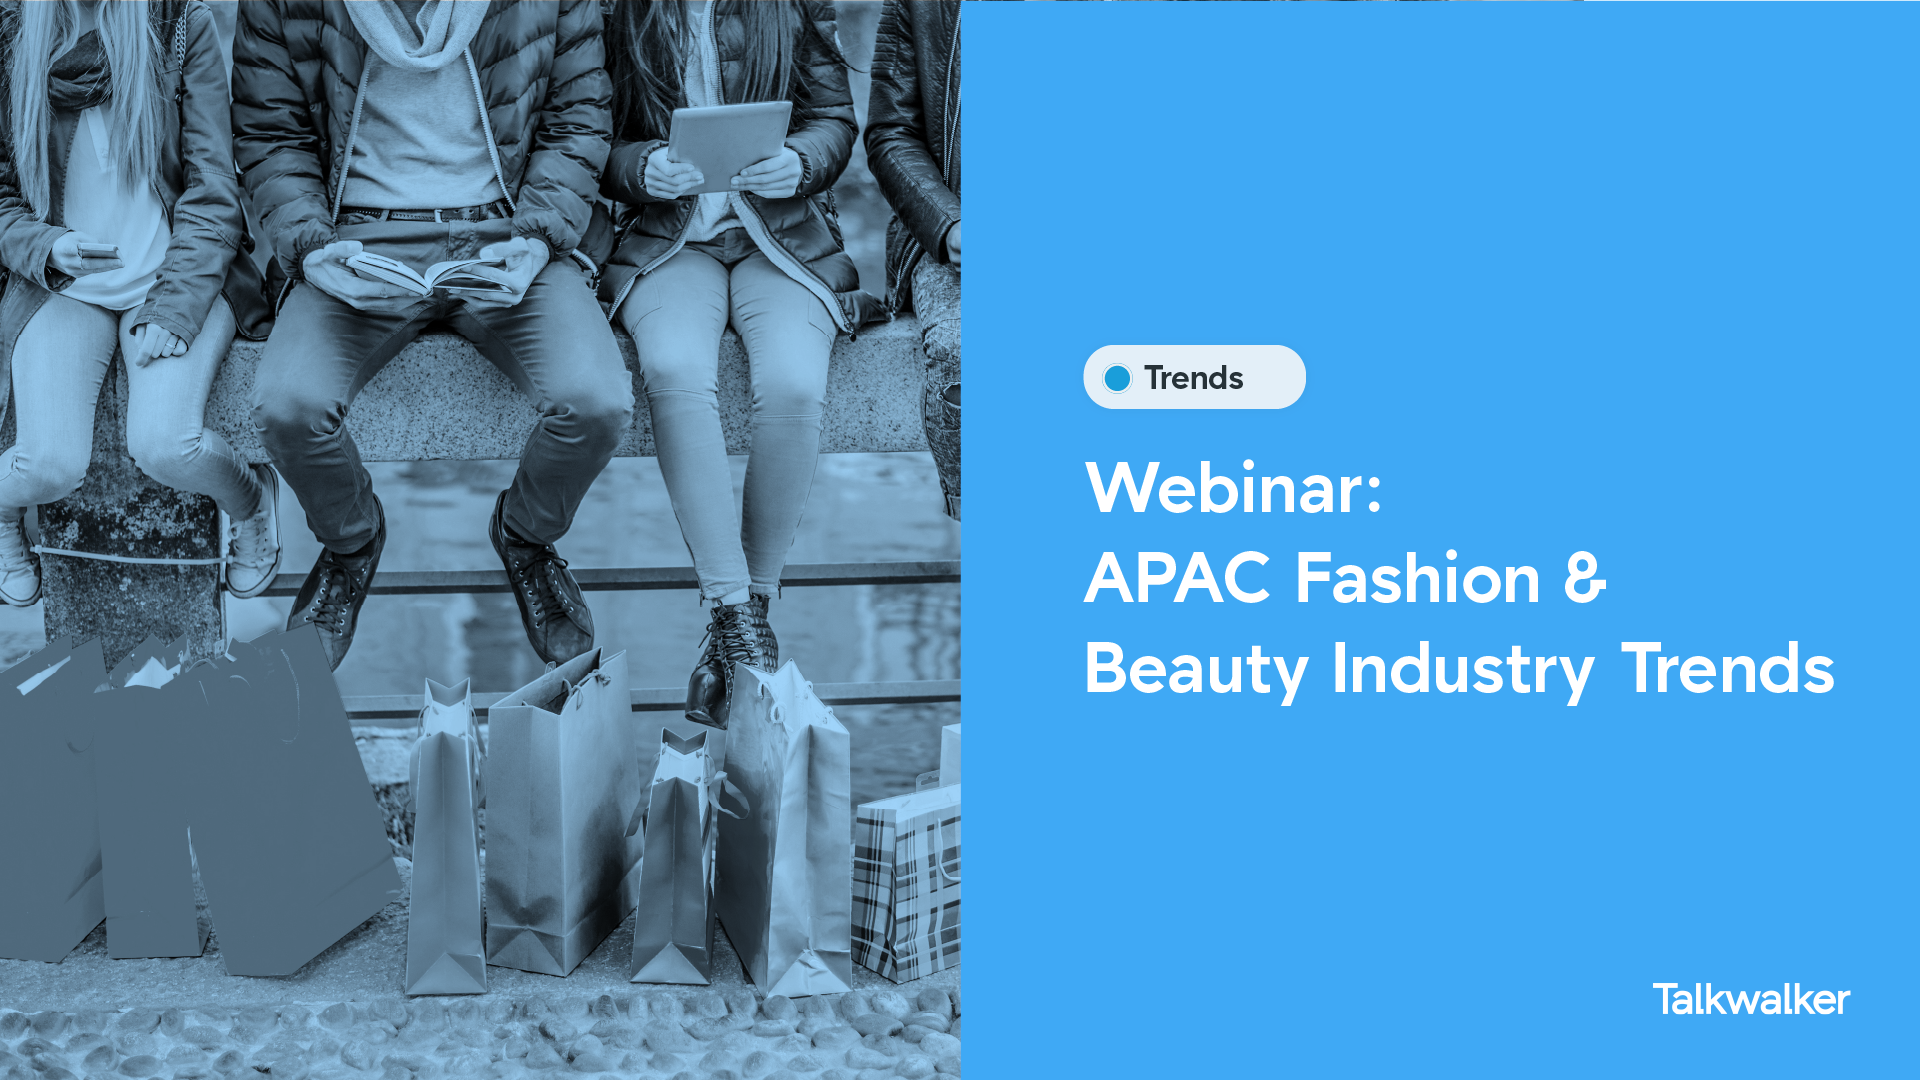 Navigating the APAC fashion & beauty industry with consumer insights